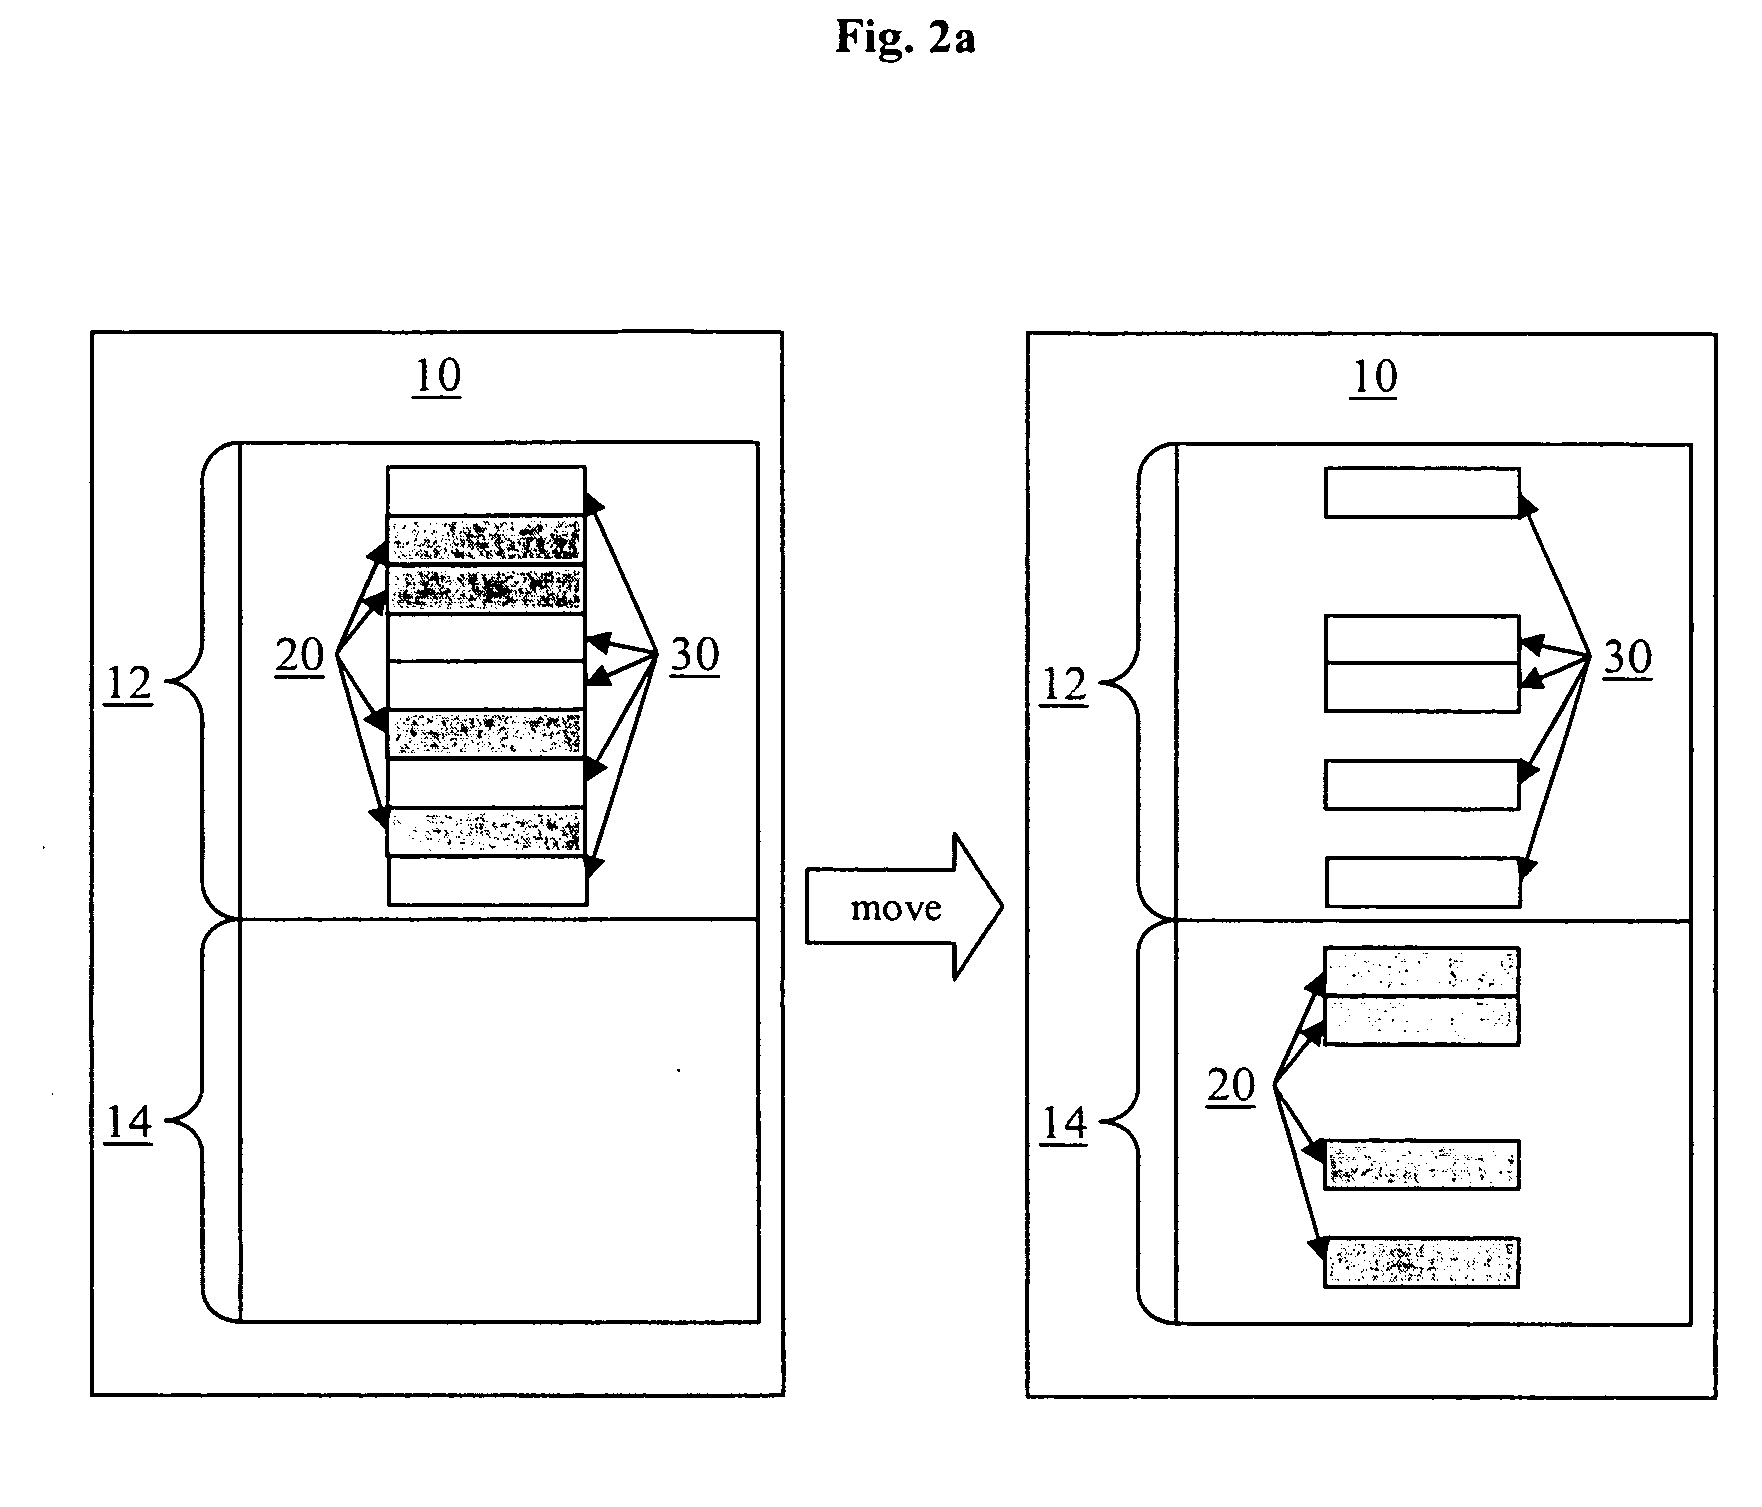 Method for mass-deleting data records of a database system